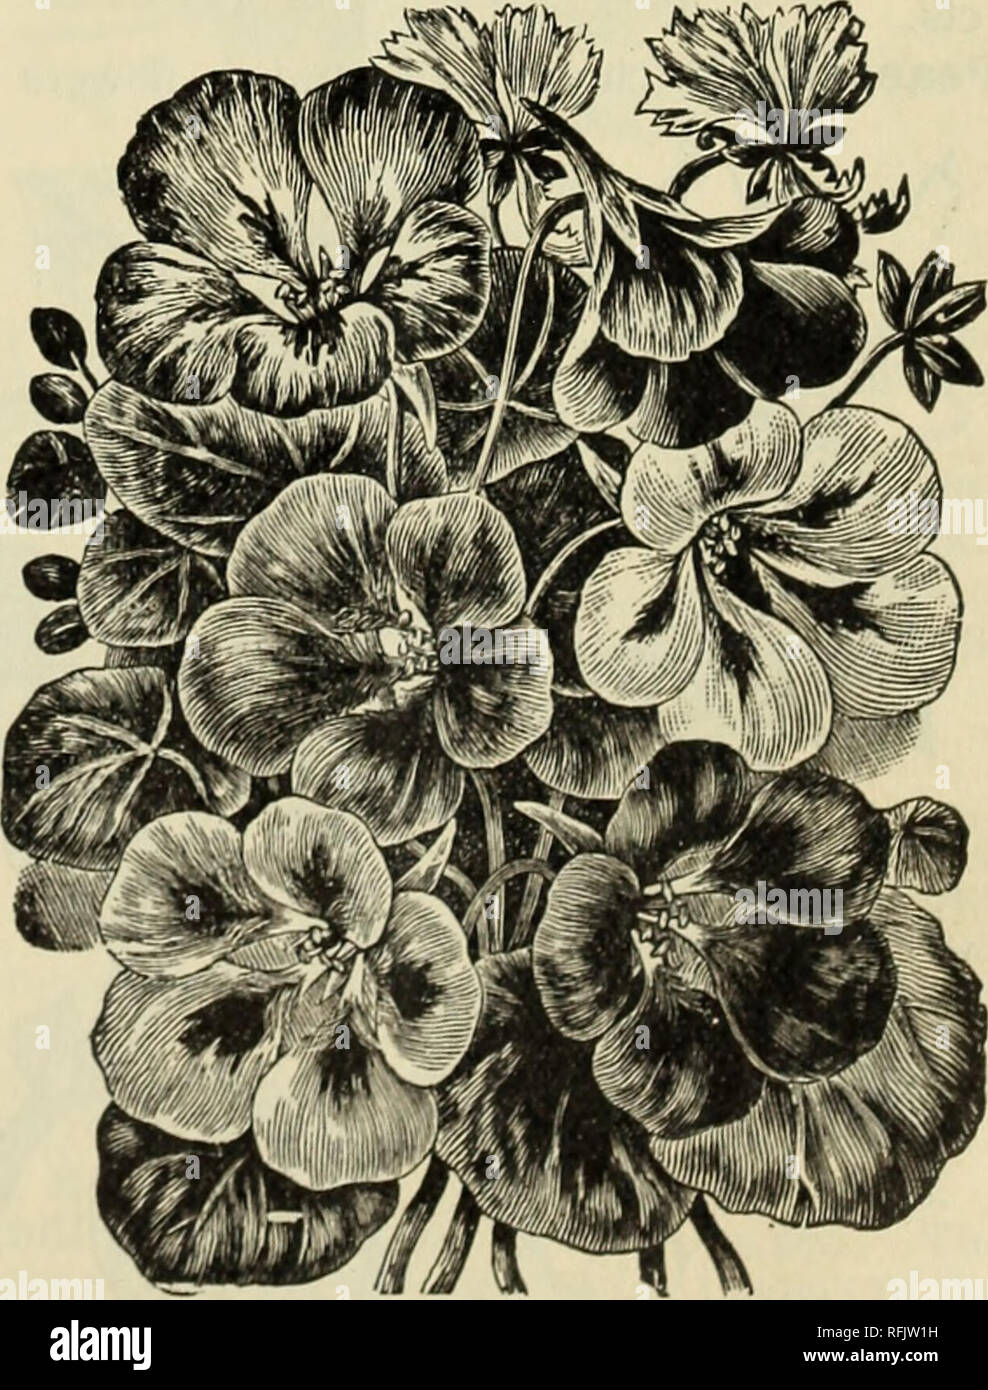 . Annual catalogue of seeds, plants, and bulbs, 1899. Nursery stock New York (State) Catalogs; Vegetables Seeds Catalogs; Flowers Seeds Catalogs; Fruit trees Catalogs; Bulbs (Plants) Catalogs; Shrubs Catalogs; Plants, Ornamental Catalogs. MESEMBRYANTHEMUM. Dwarf-growing plants of great beauty; well suited for edging and covering rockwork; pro- duce their star-like flowers in great abundance the whole summer. Half- hardy annual. Tricolor (Wax Pink). Mixed colors ; X ft- Pkt. 5 cts. ? Cordifolium. Curious and beautiful. Pkt. ioc. Pomeridiana. Gold and yellow. Pkt. 10 cts. MOONFLOWER. (Northern L Stock Photo